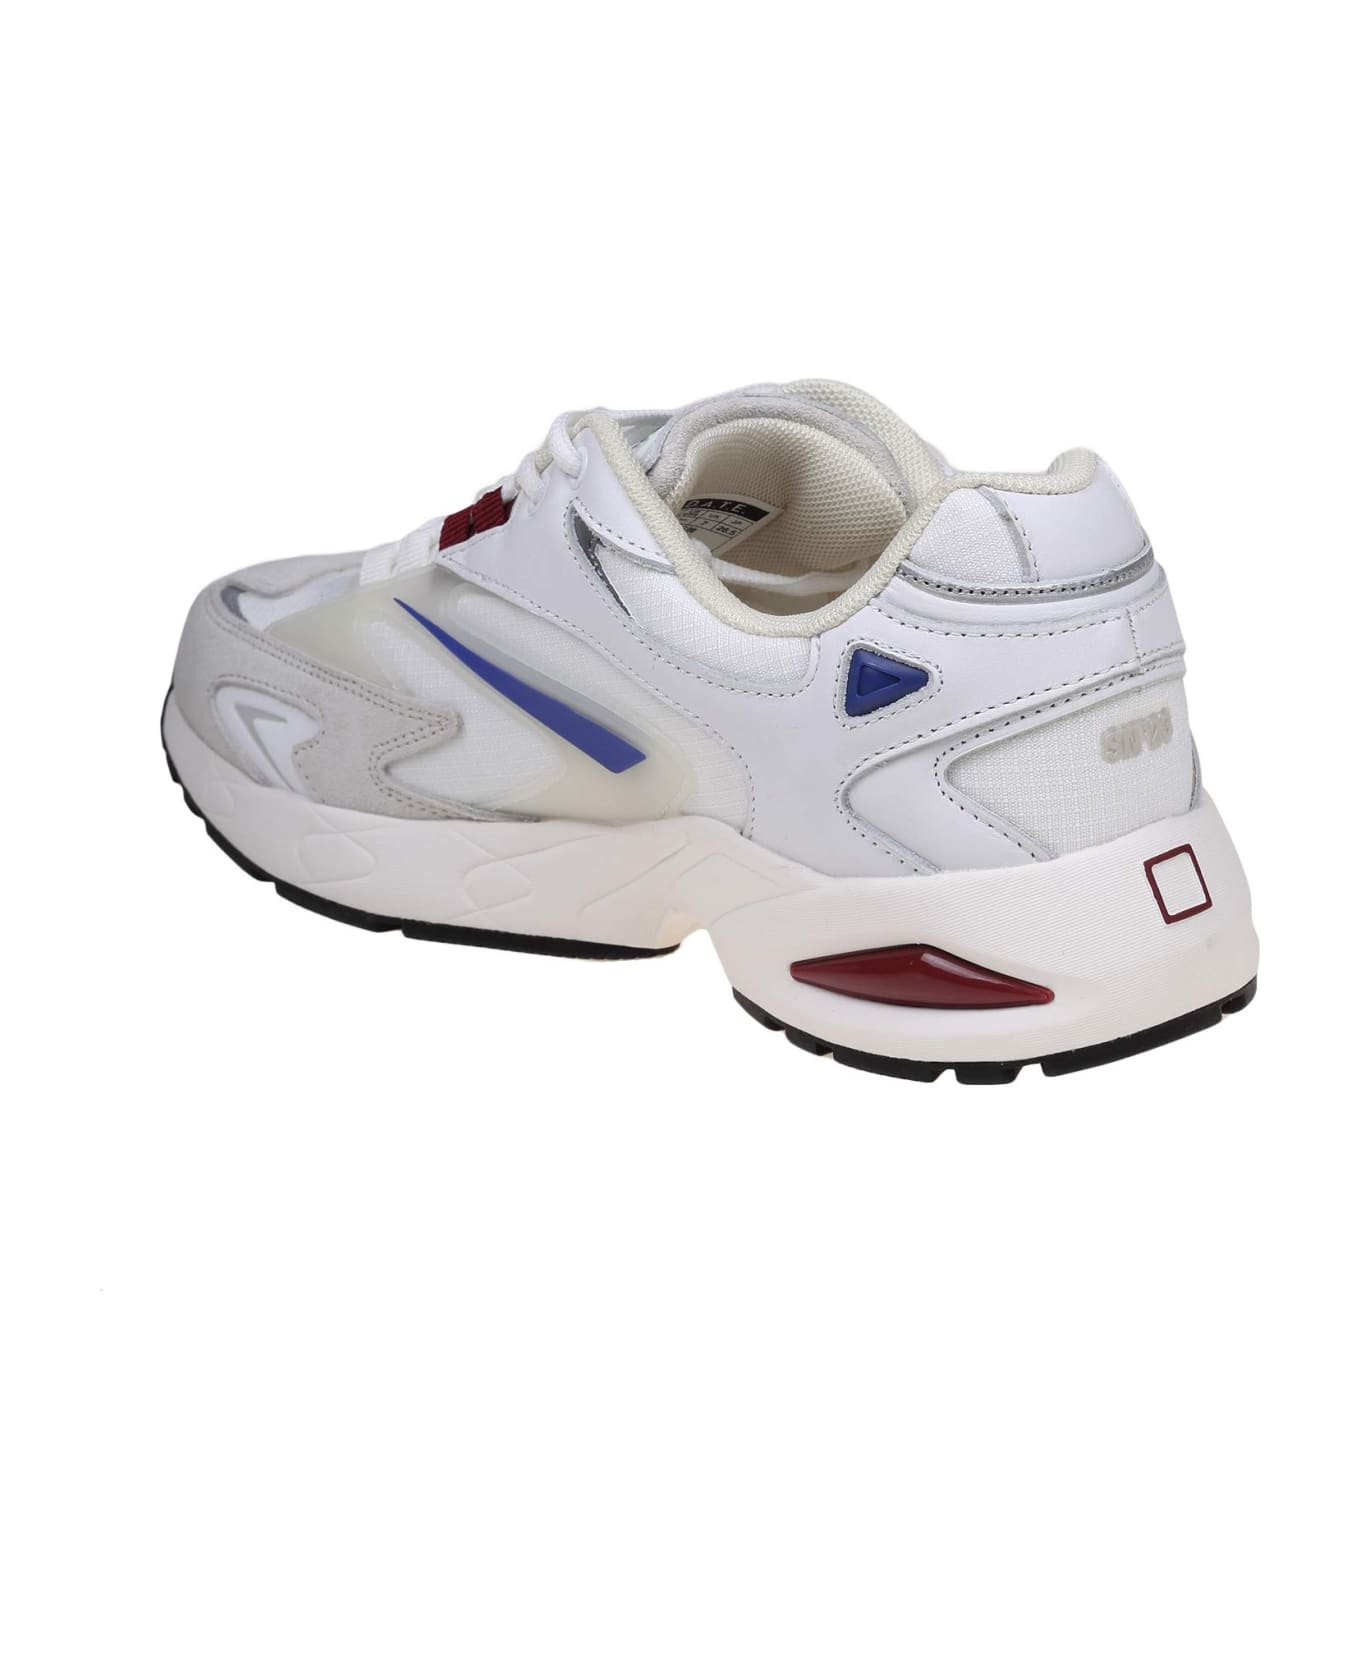 D.A.T.E. Sn23 Sneakers In White Mesh And Leather - White